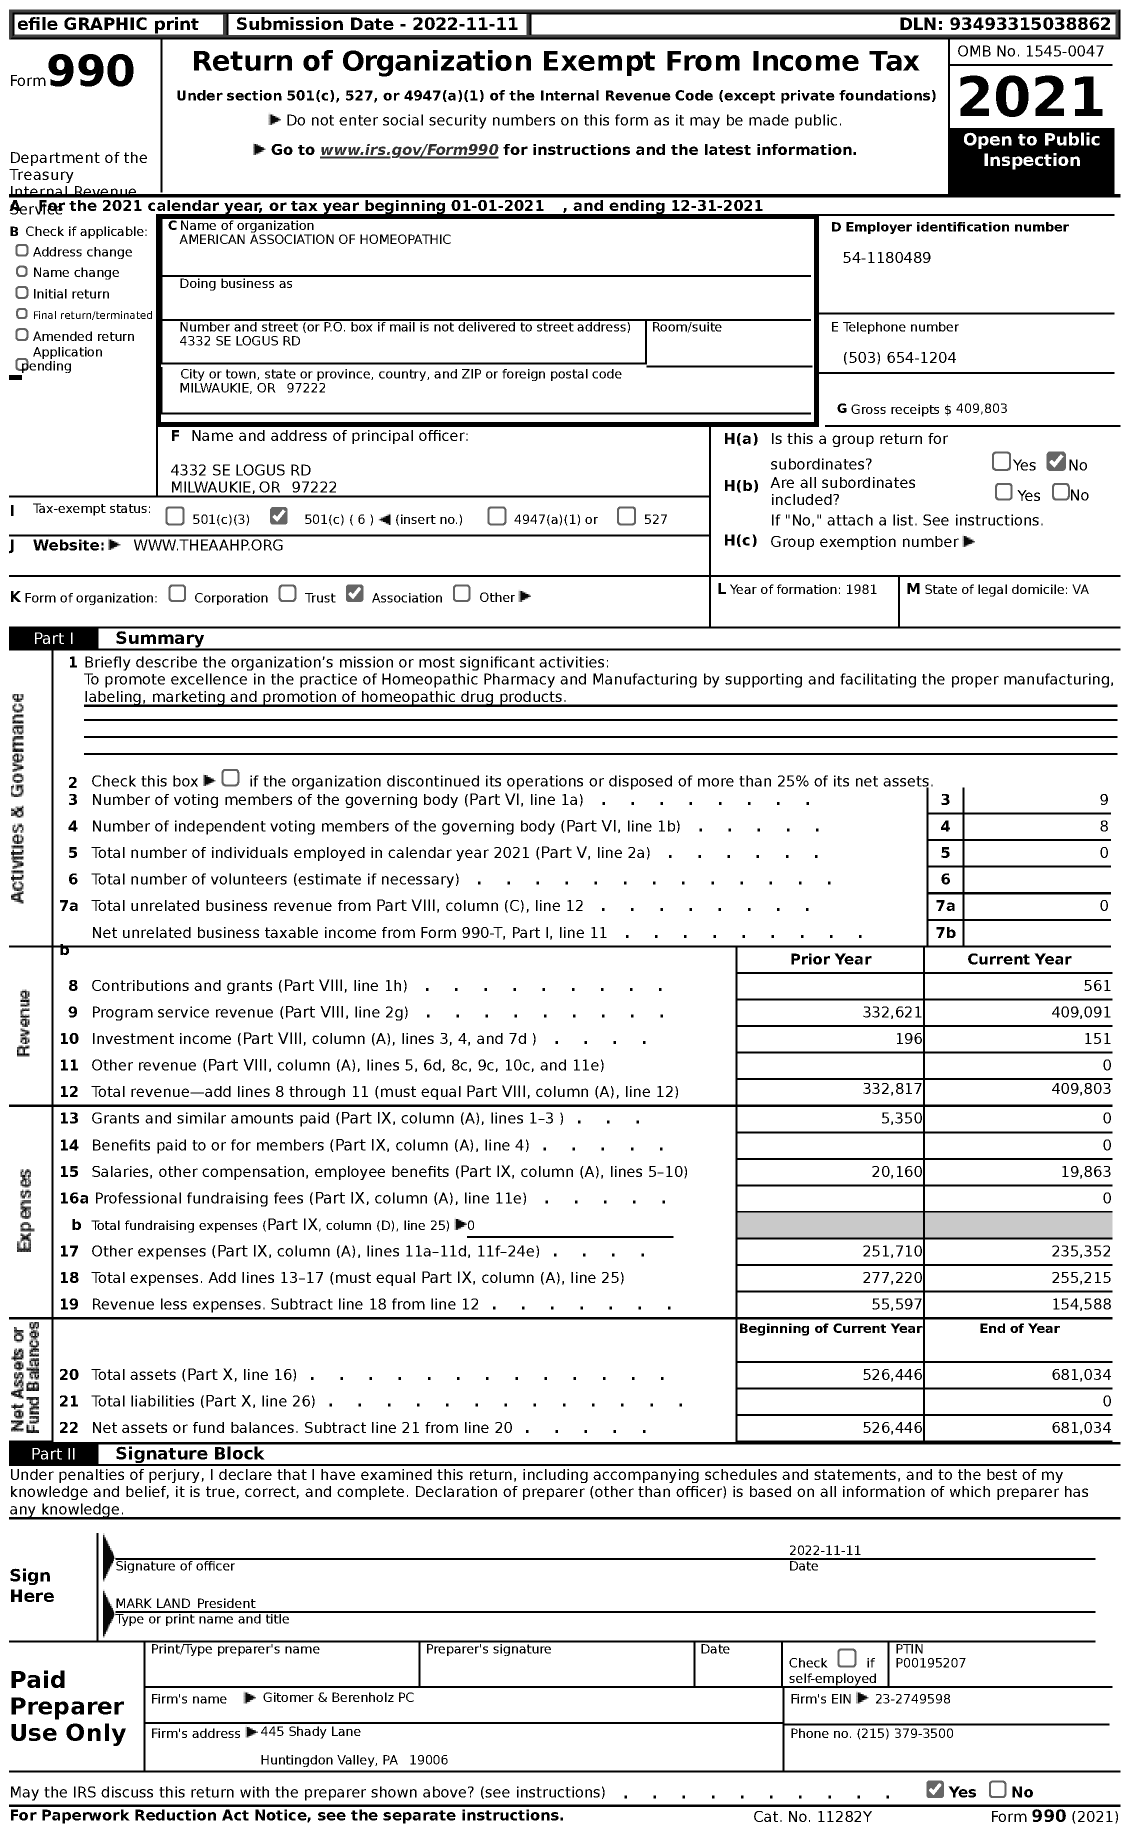 Image of first page of 2021 Form 990 for American Association of Homeopathic